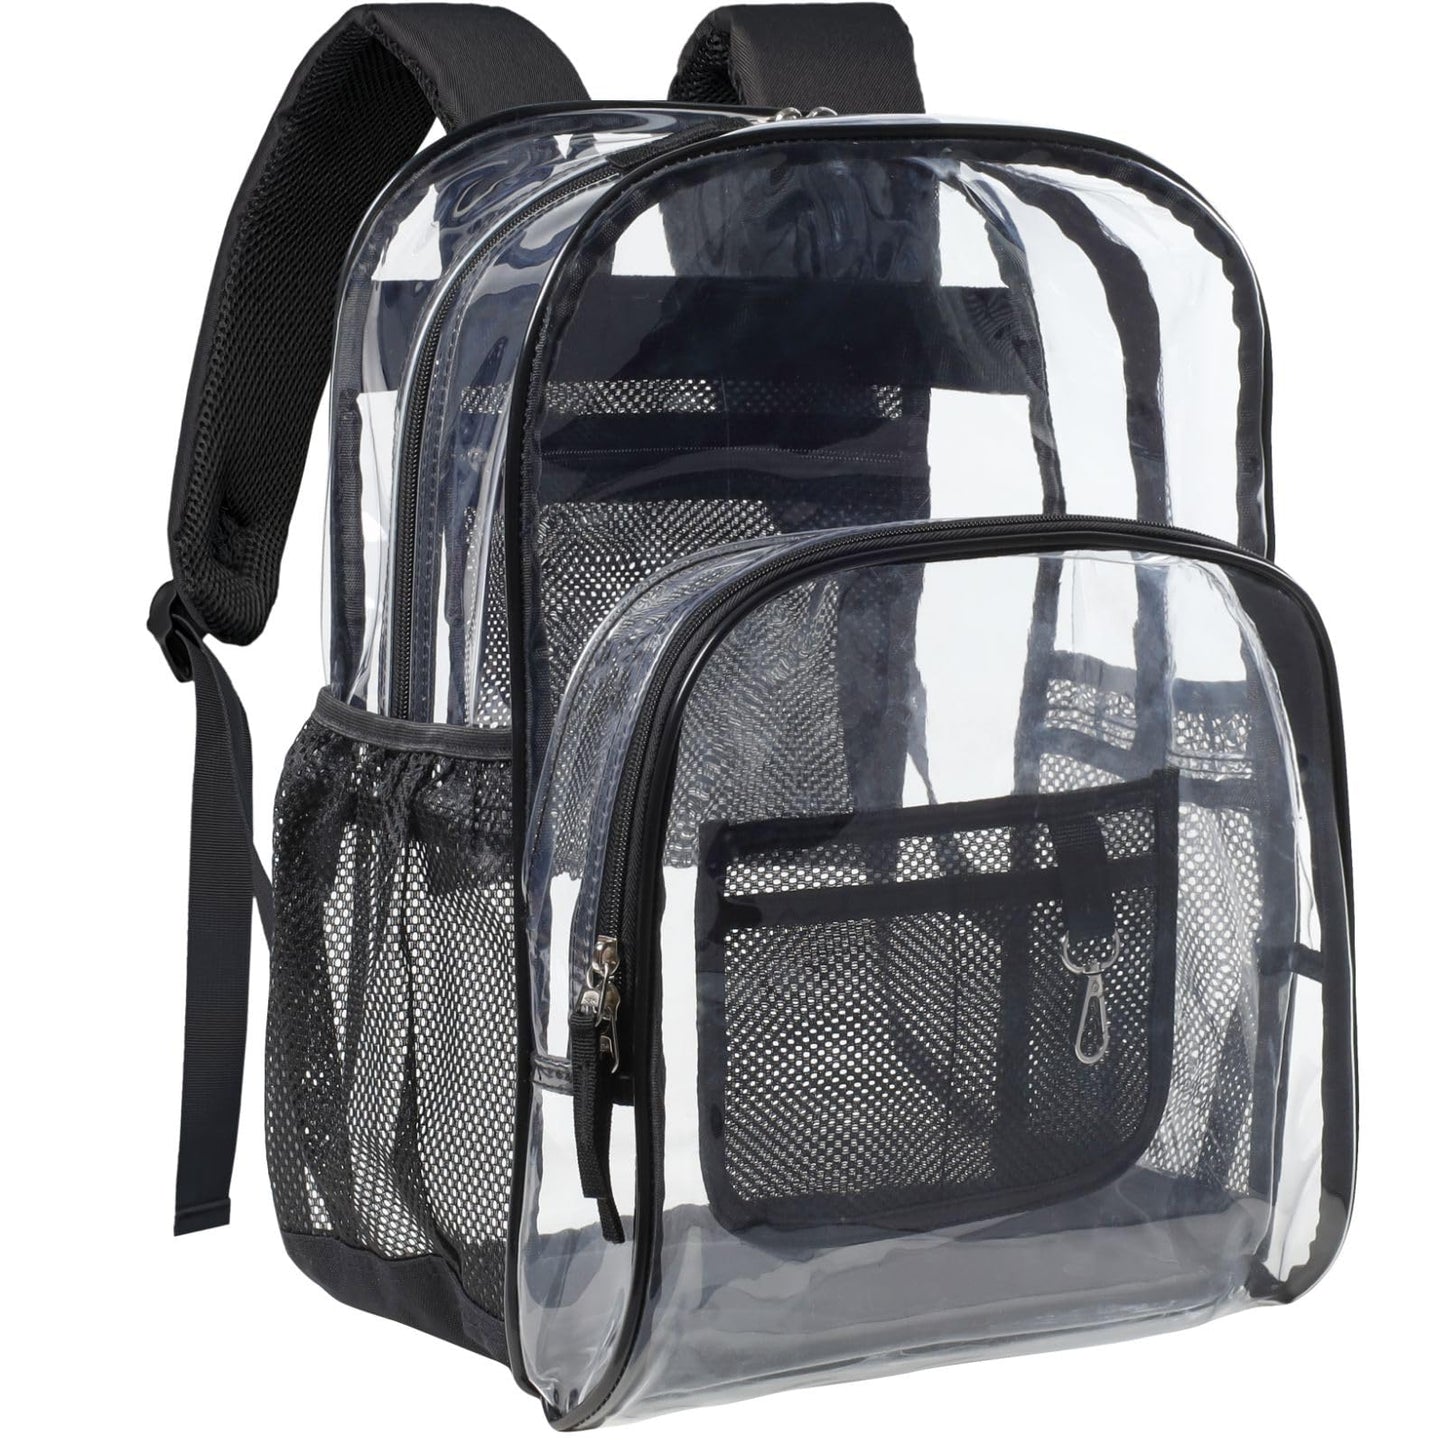 PACKISM Large  Clear Backpack - 17 inch Transparent PVC Student Backpacks for School